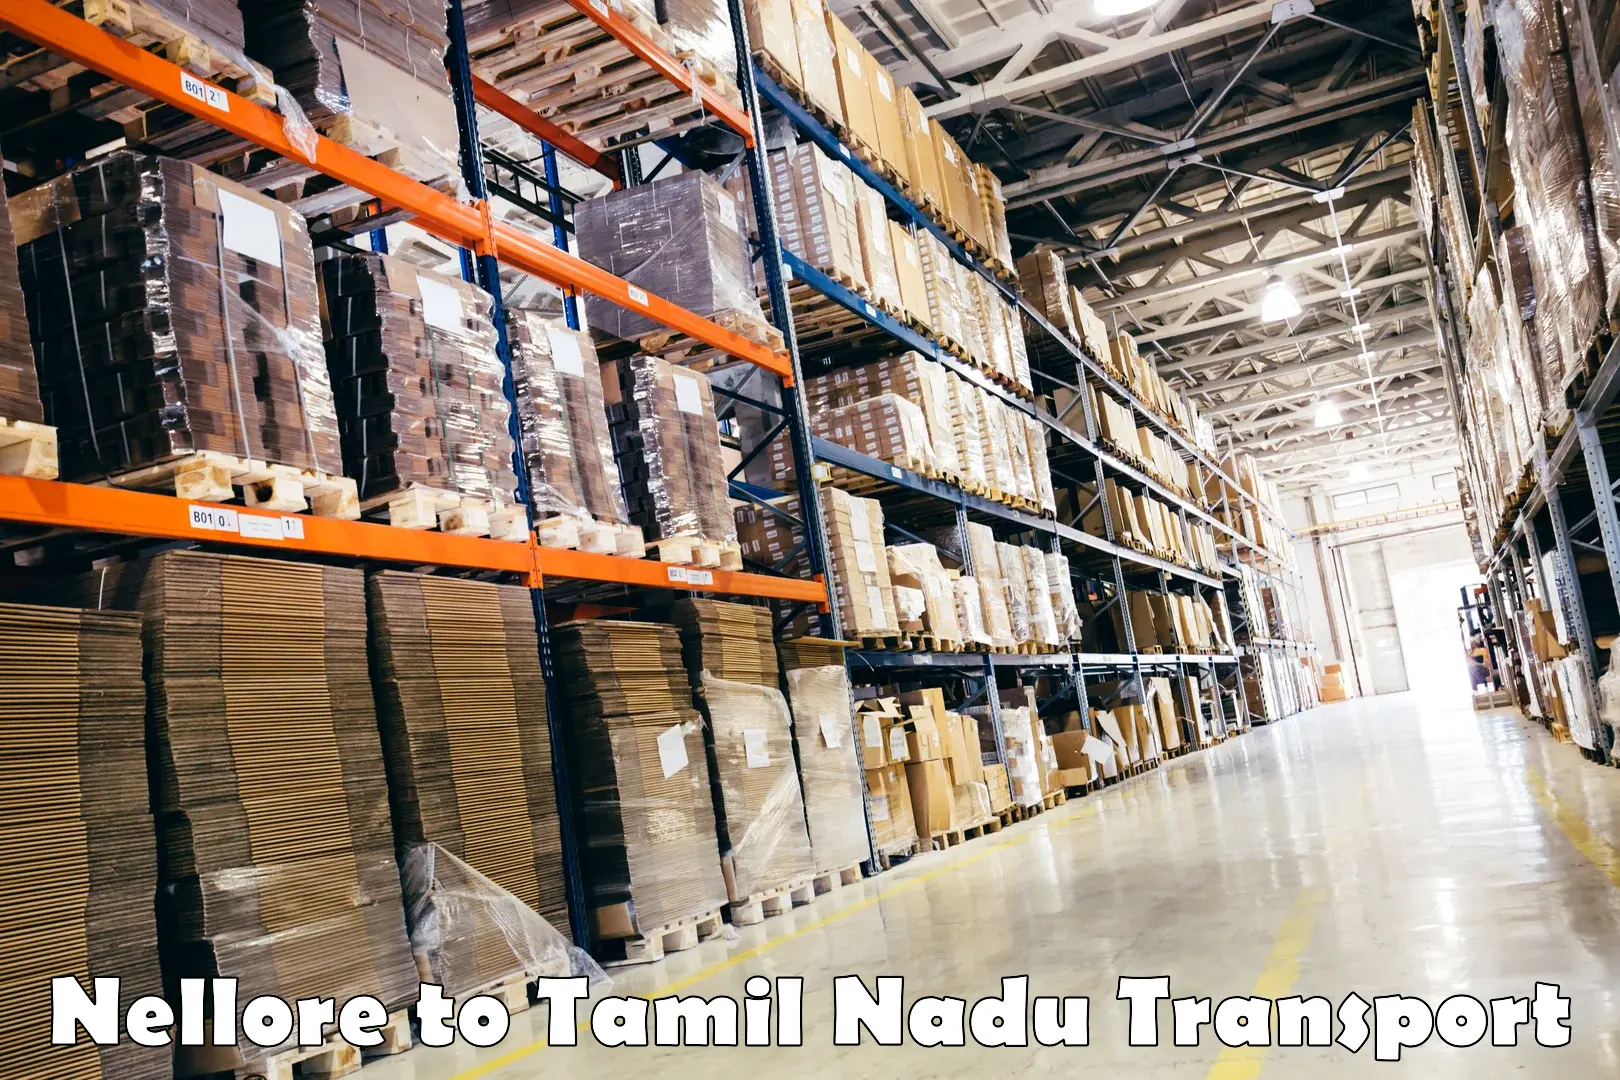 Transport in sharing Nellore to Tamil Nadu